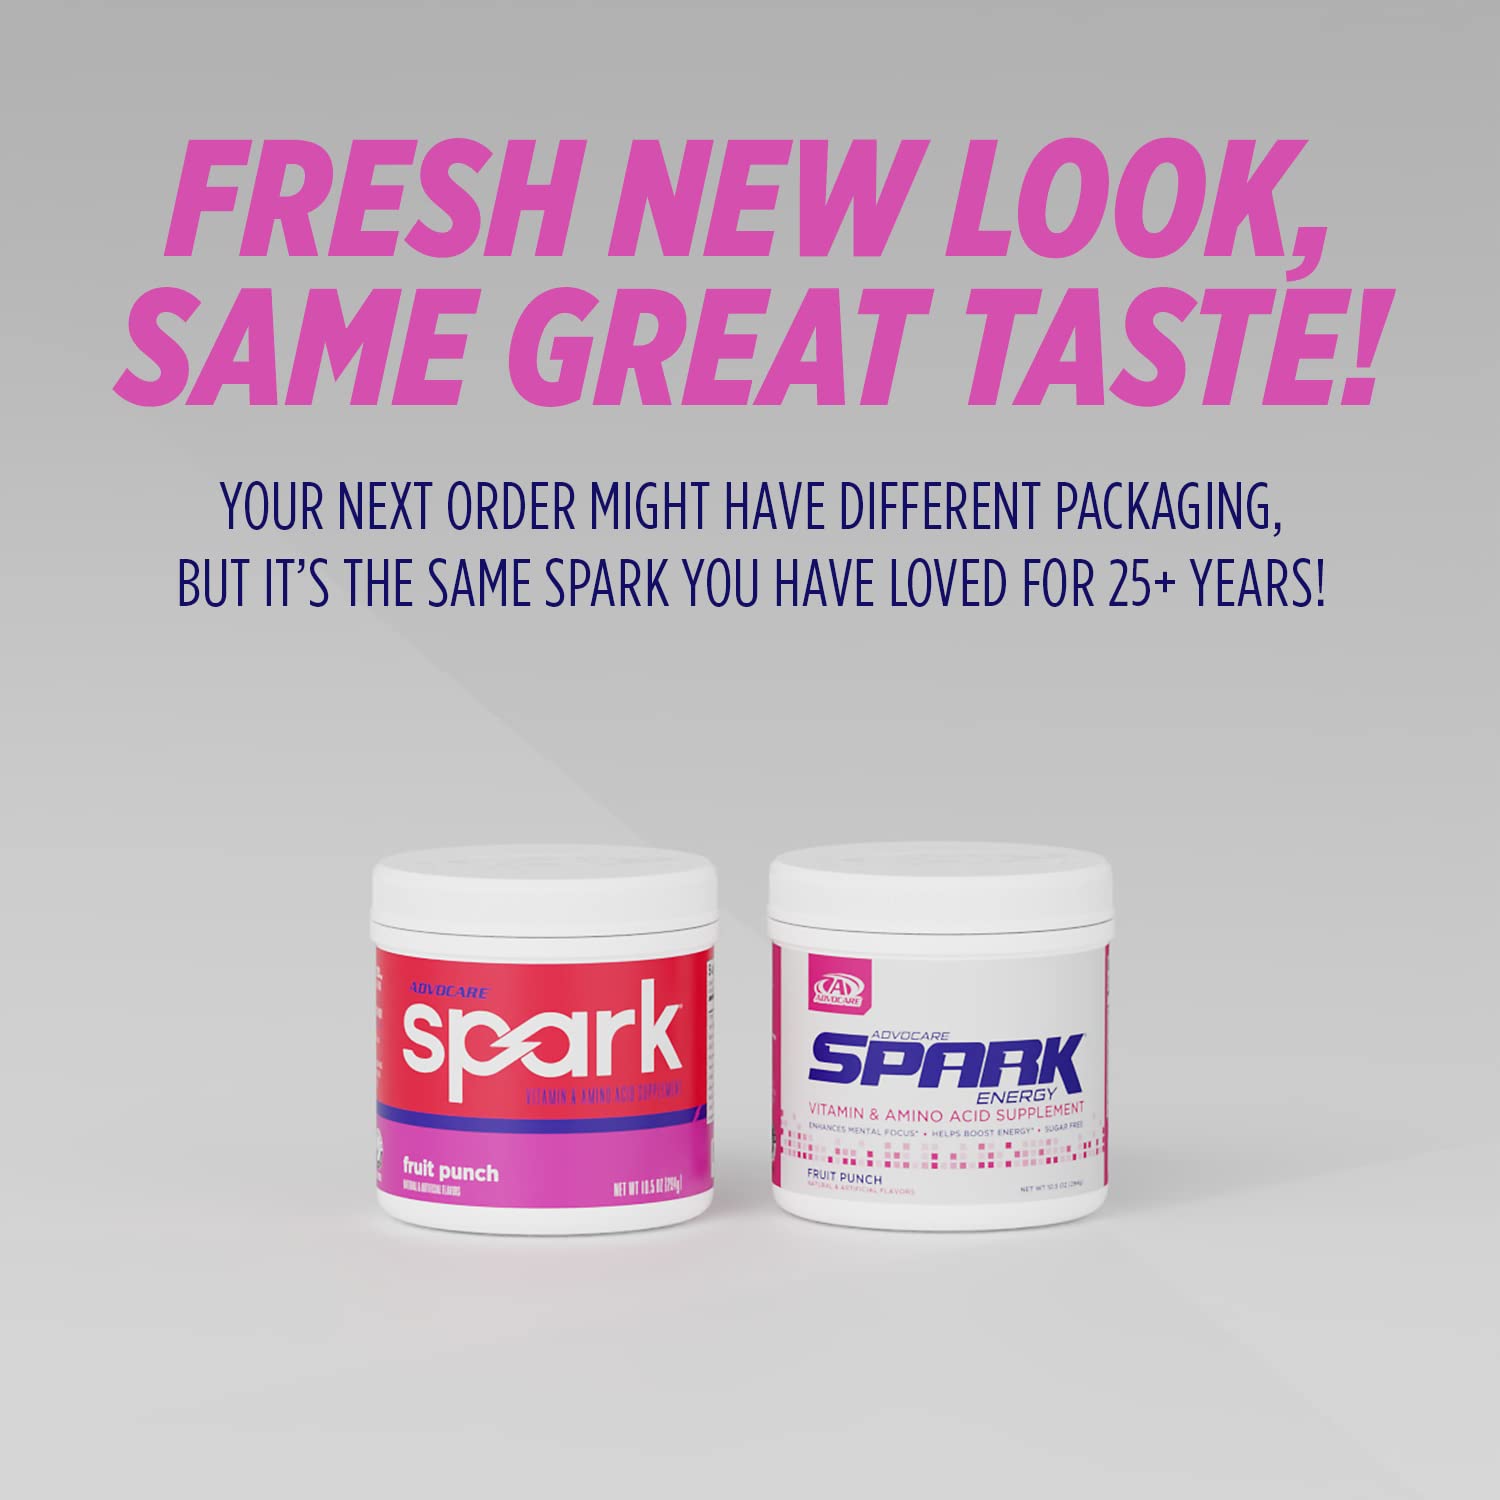 AdvoCare Spark Vitamin & Amino Acid Supplement - Focus and Energy Drink Mix - Fruit Punch - 10.5 oz